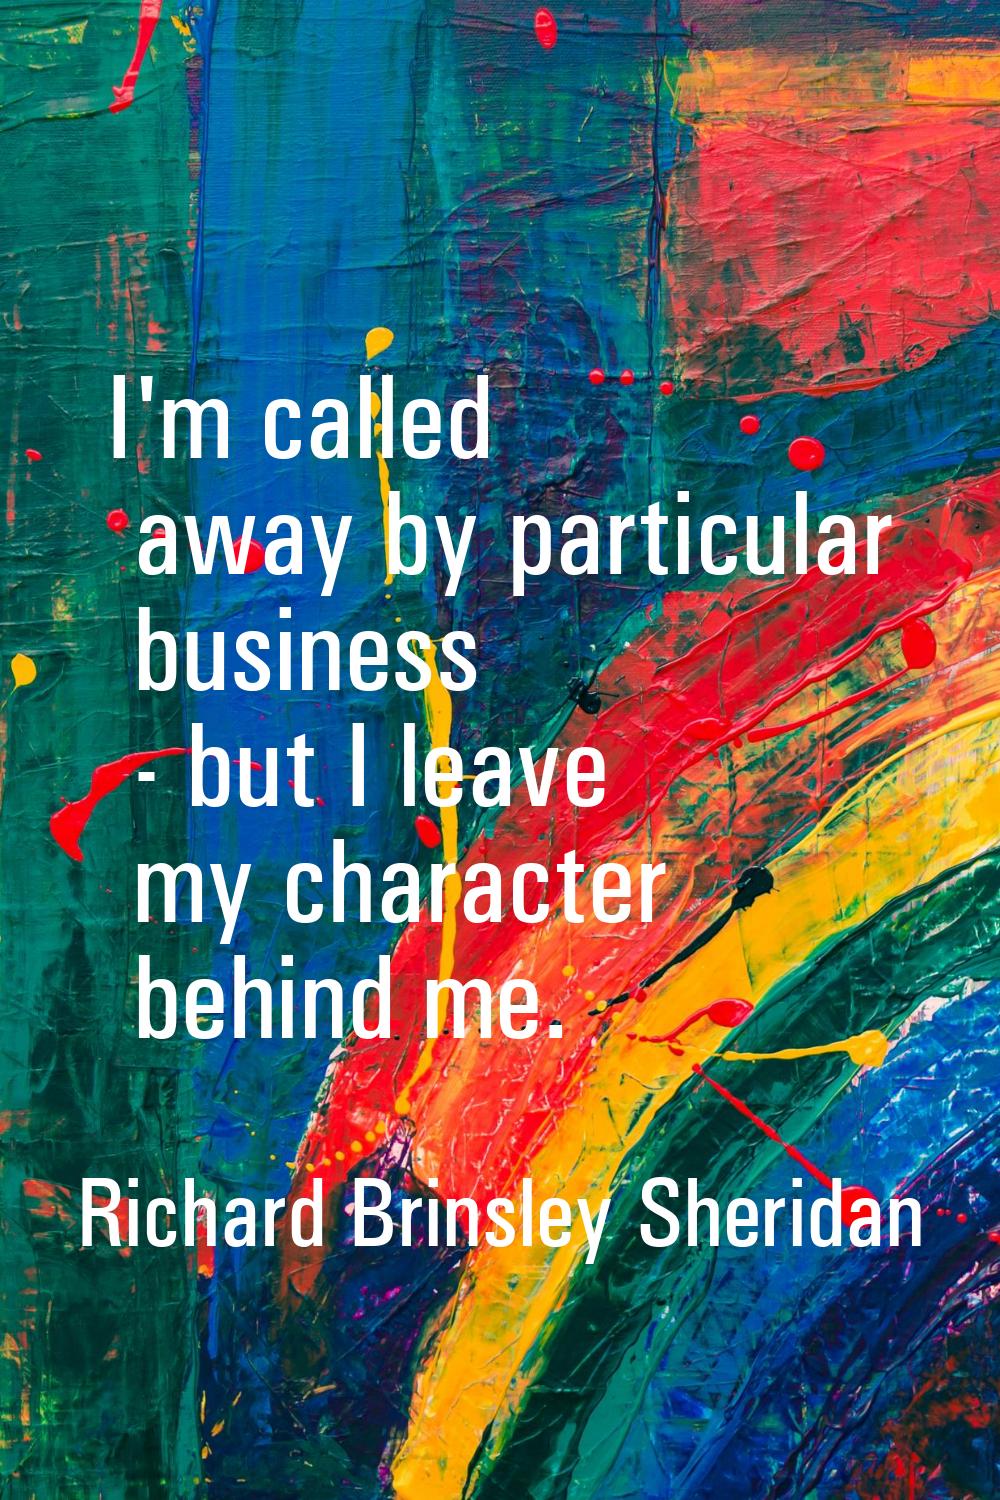 I'm called away by particular business - but I leave my character behind me.